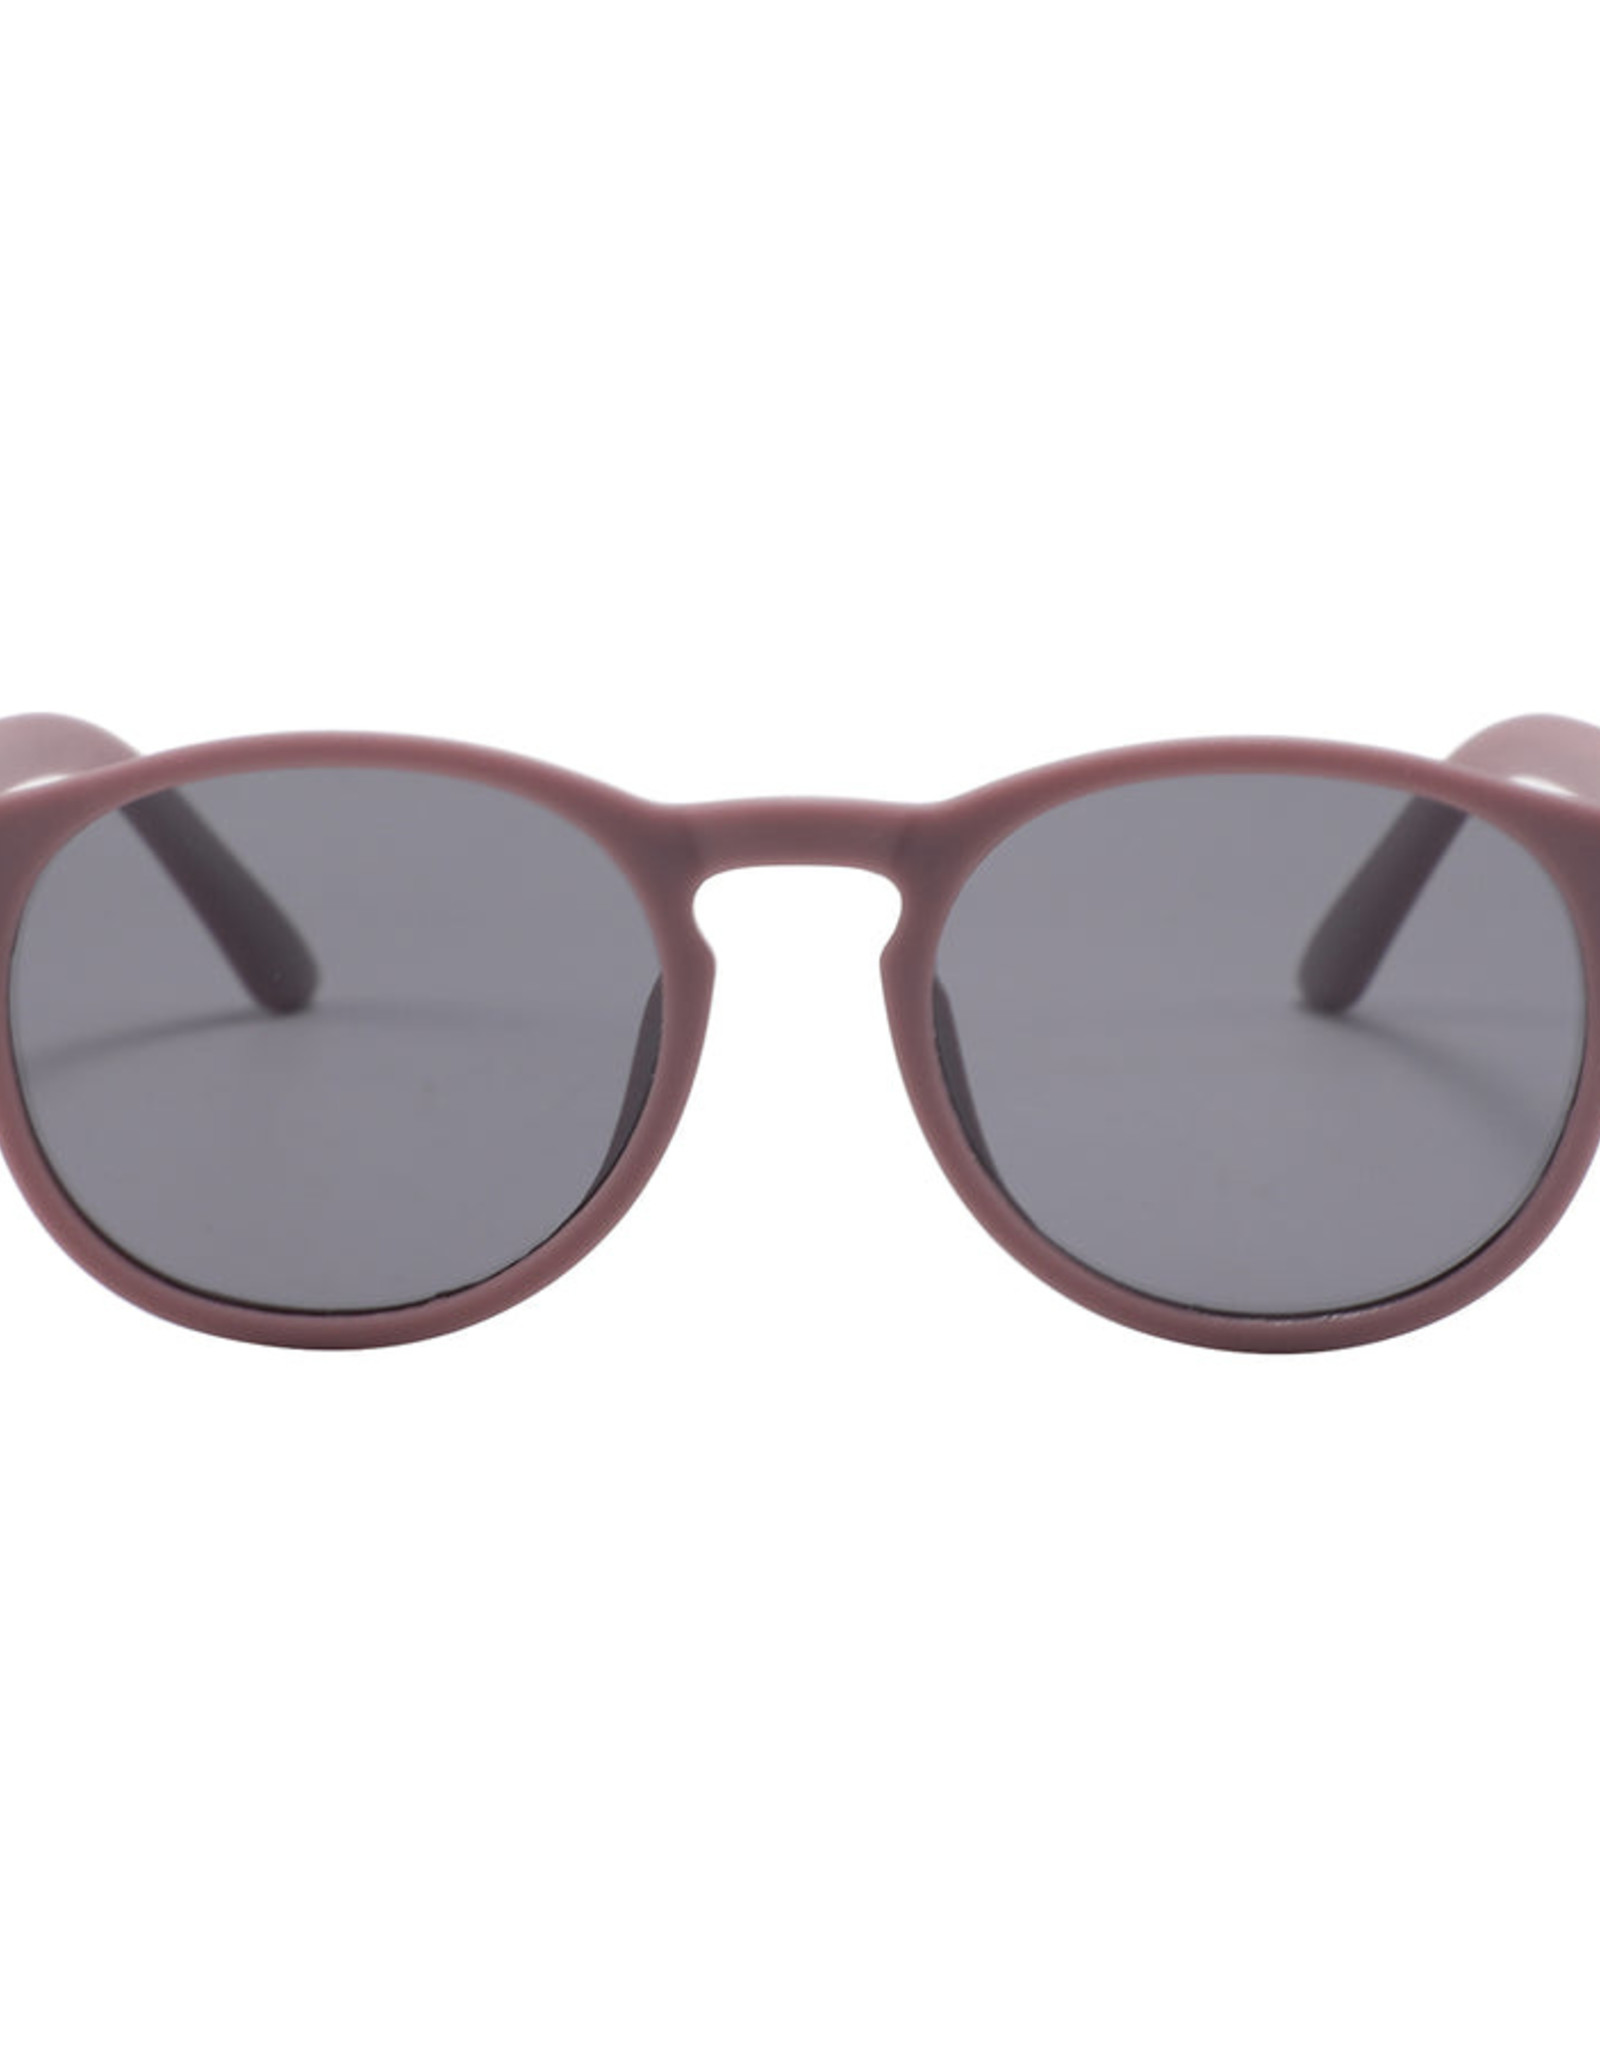 Current Tyed SP23 Keyhole Sunnies